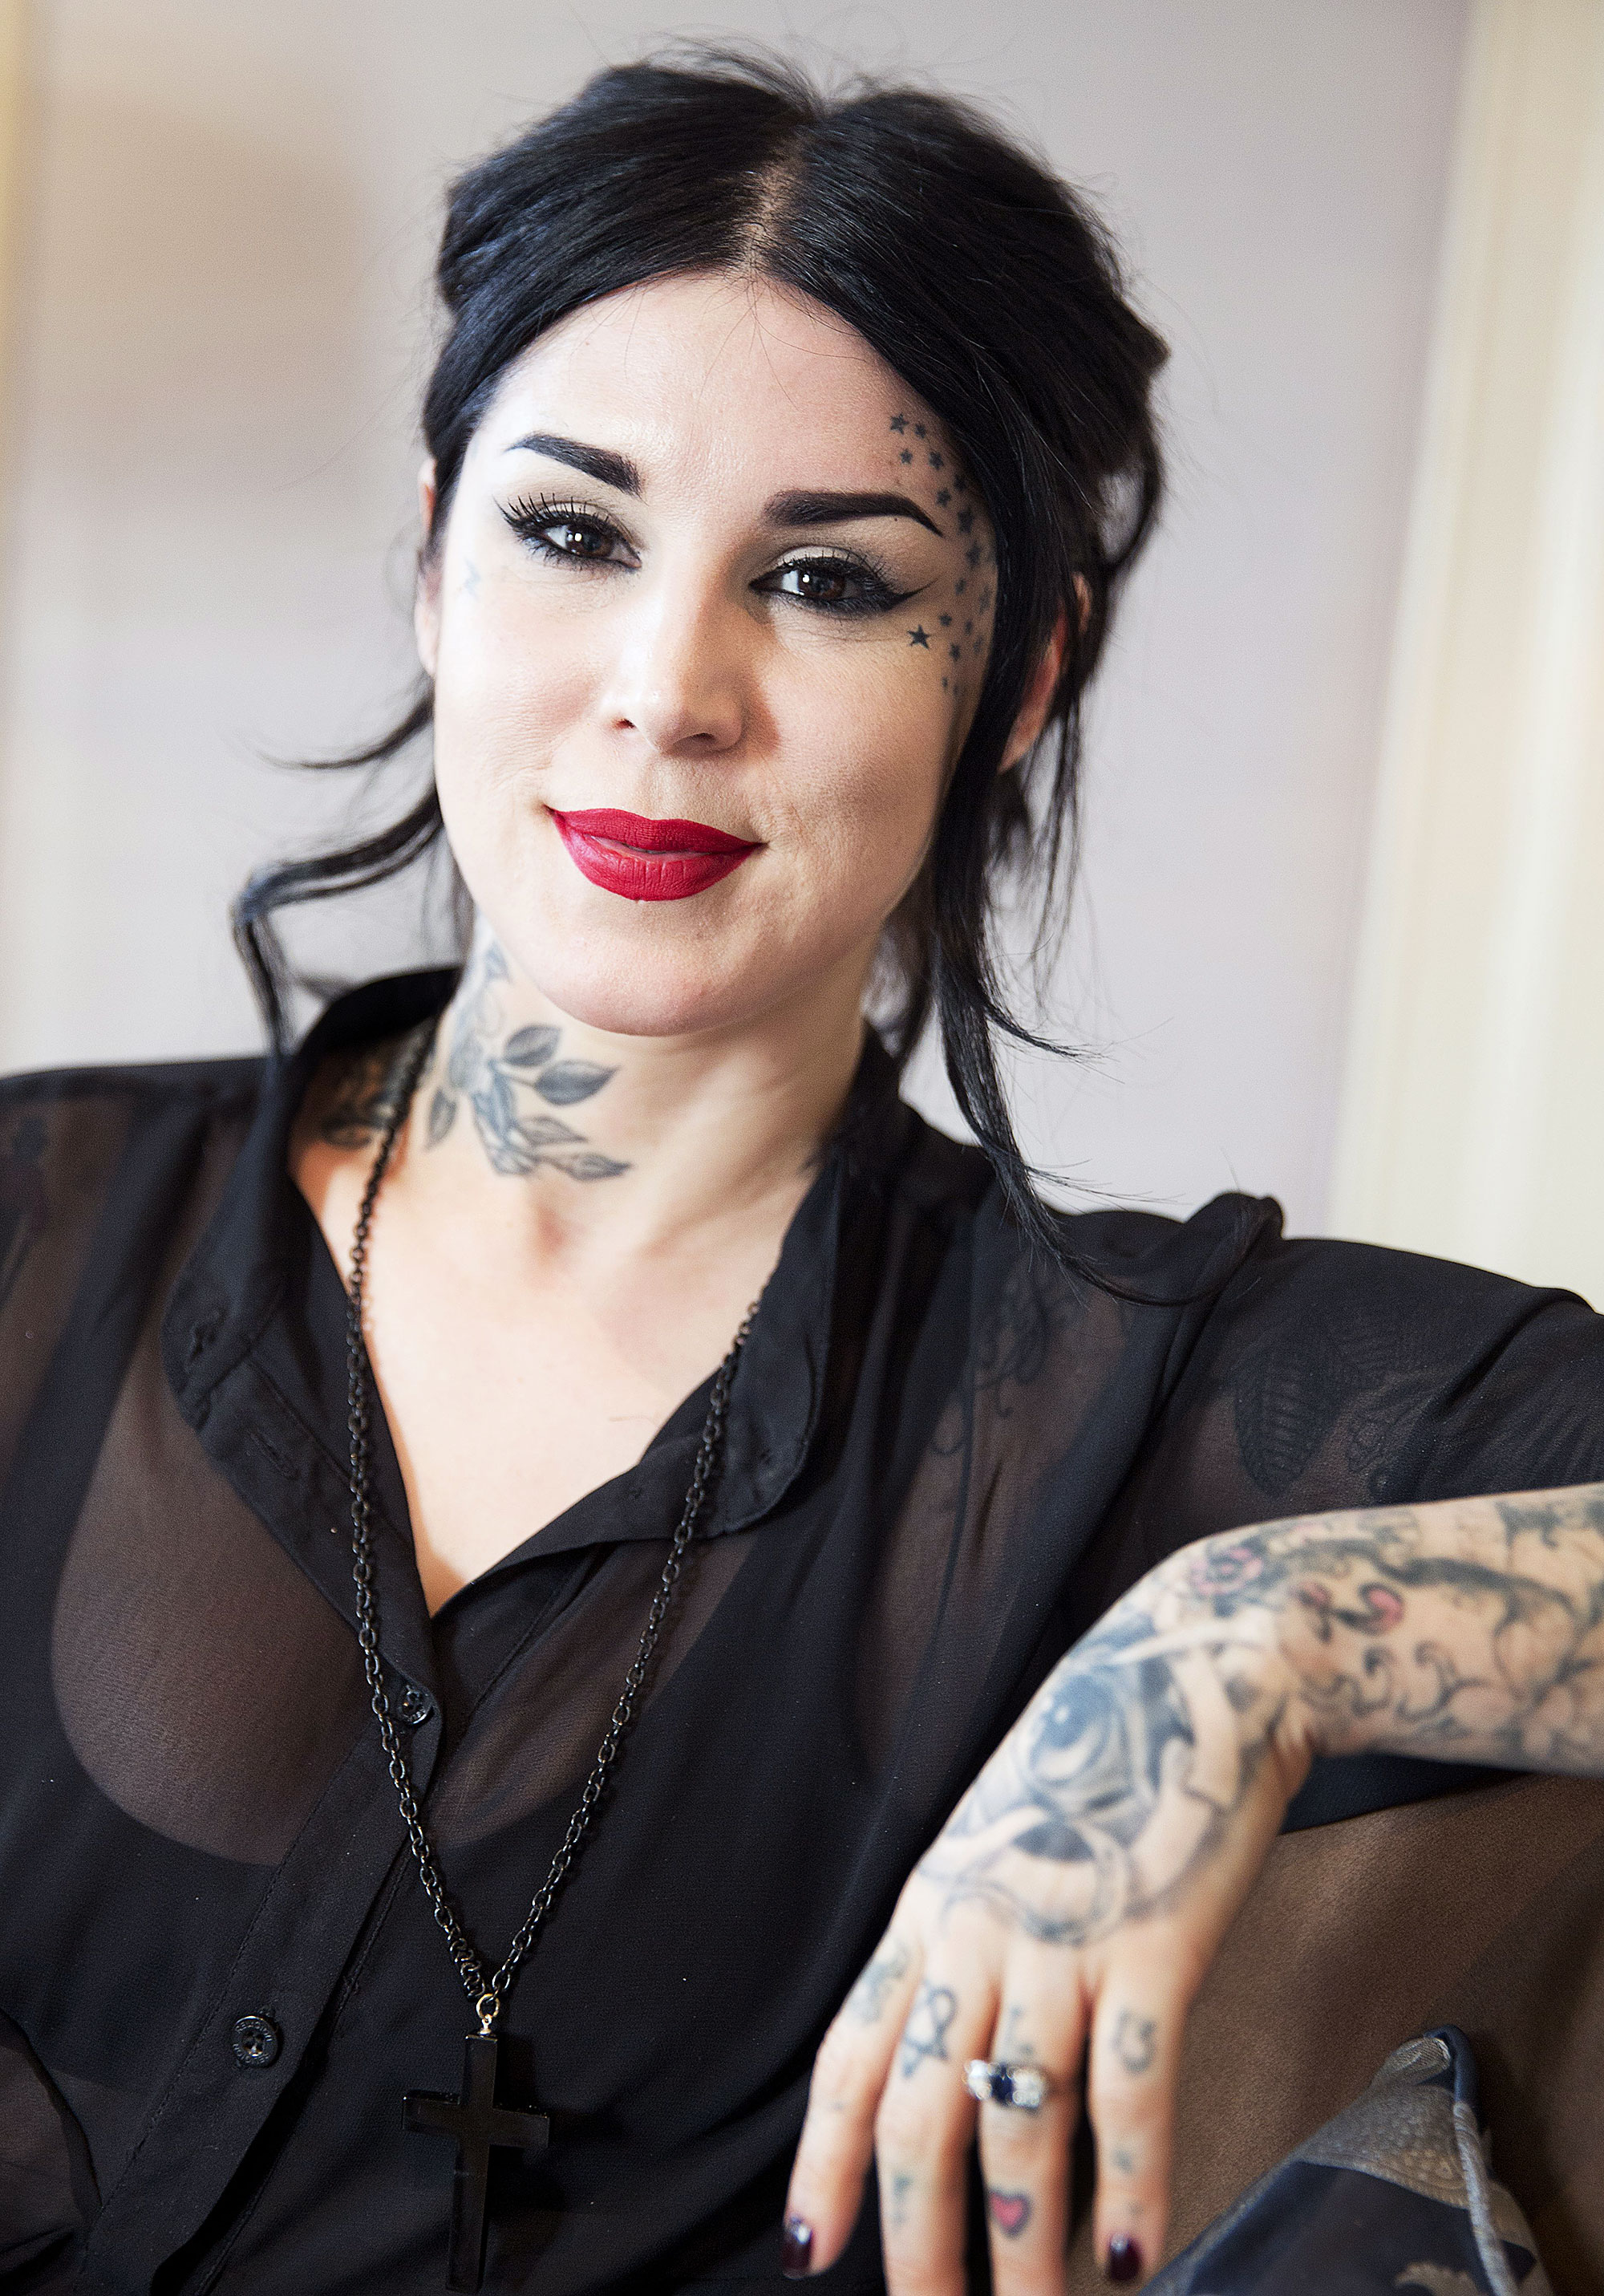 Kat Von D Beauty to Become KVD Beauty, Owned Kendo: Details